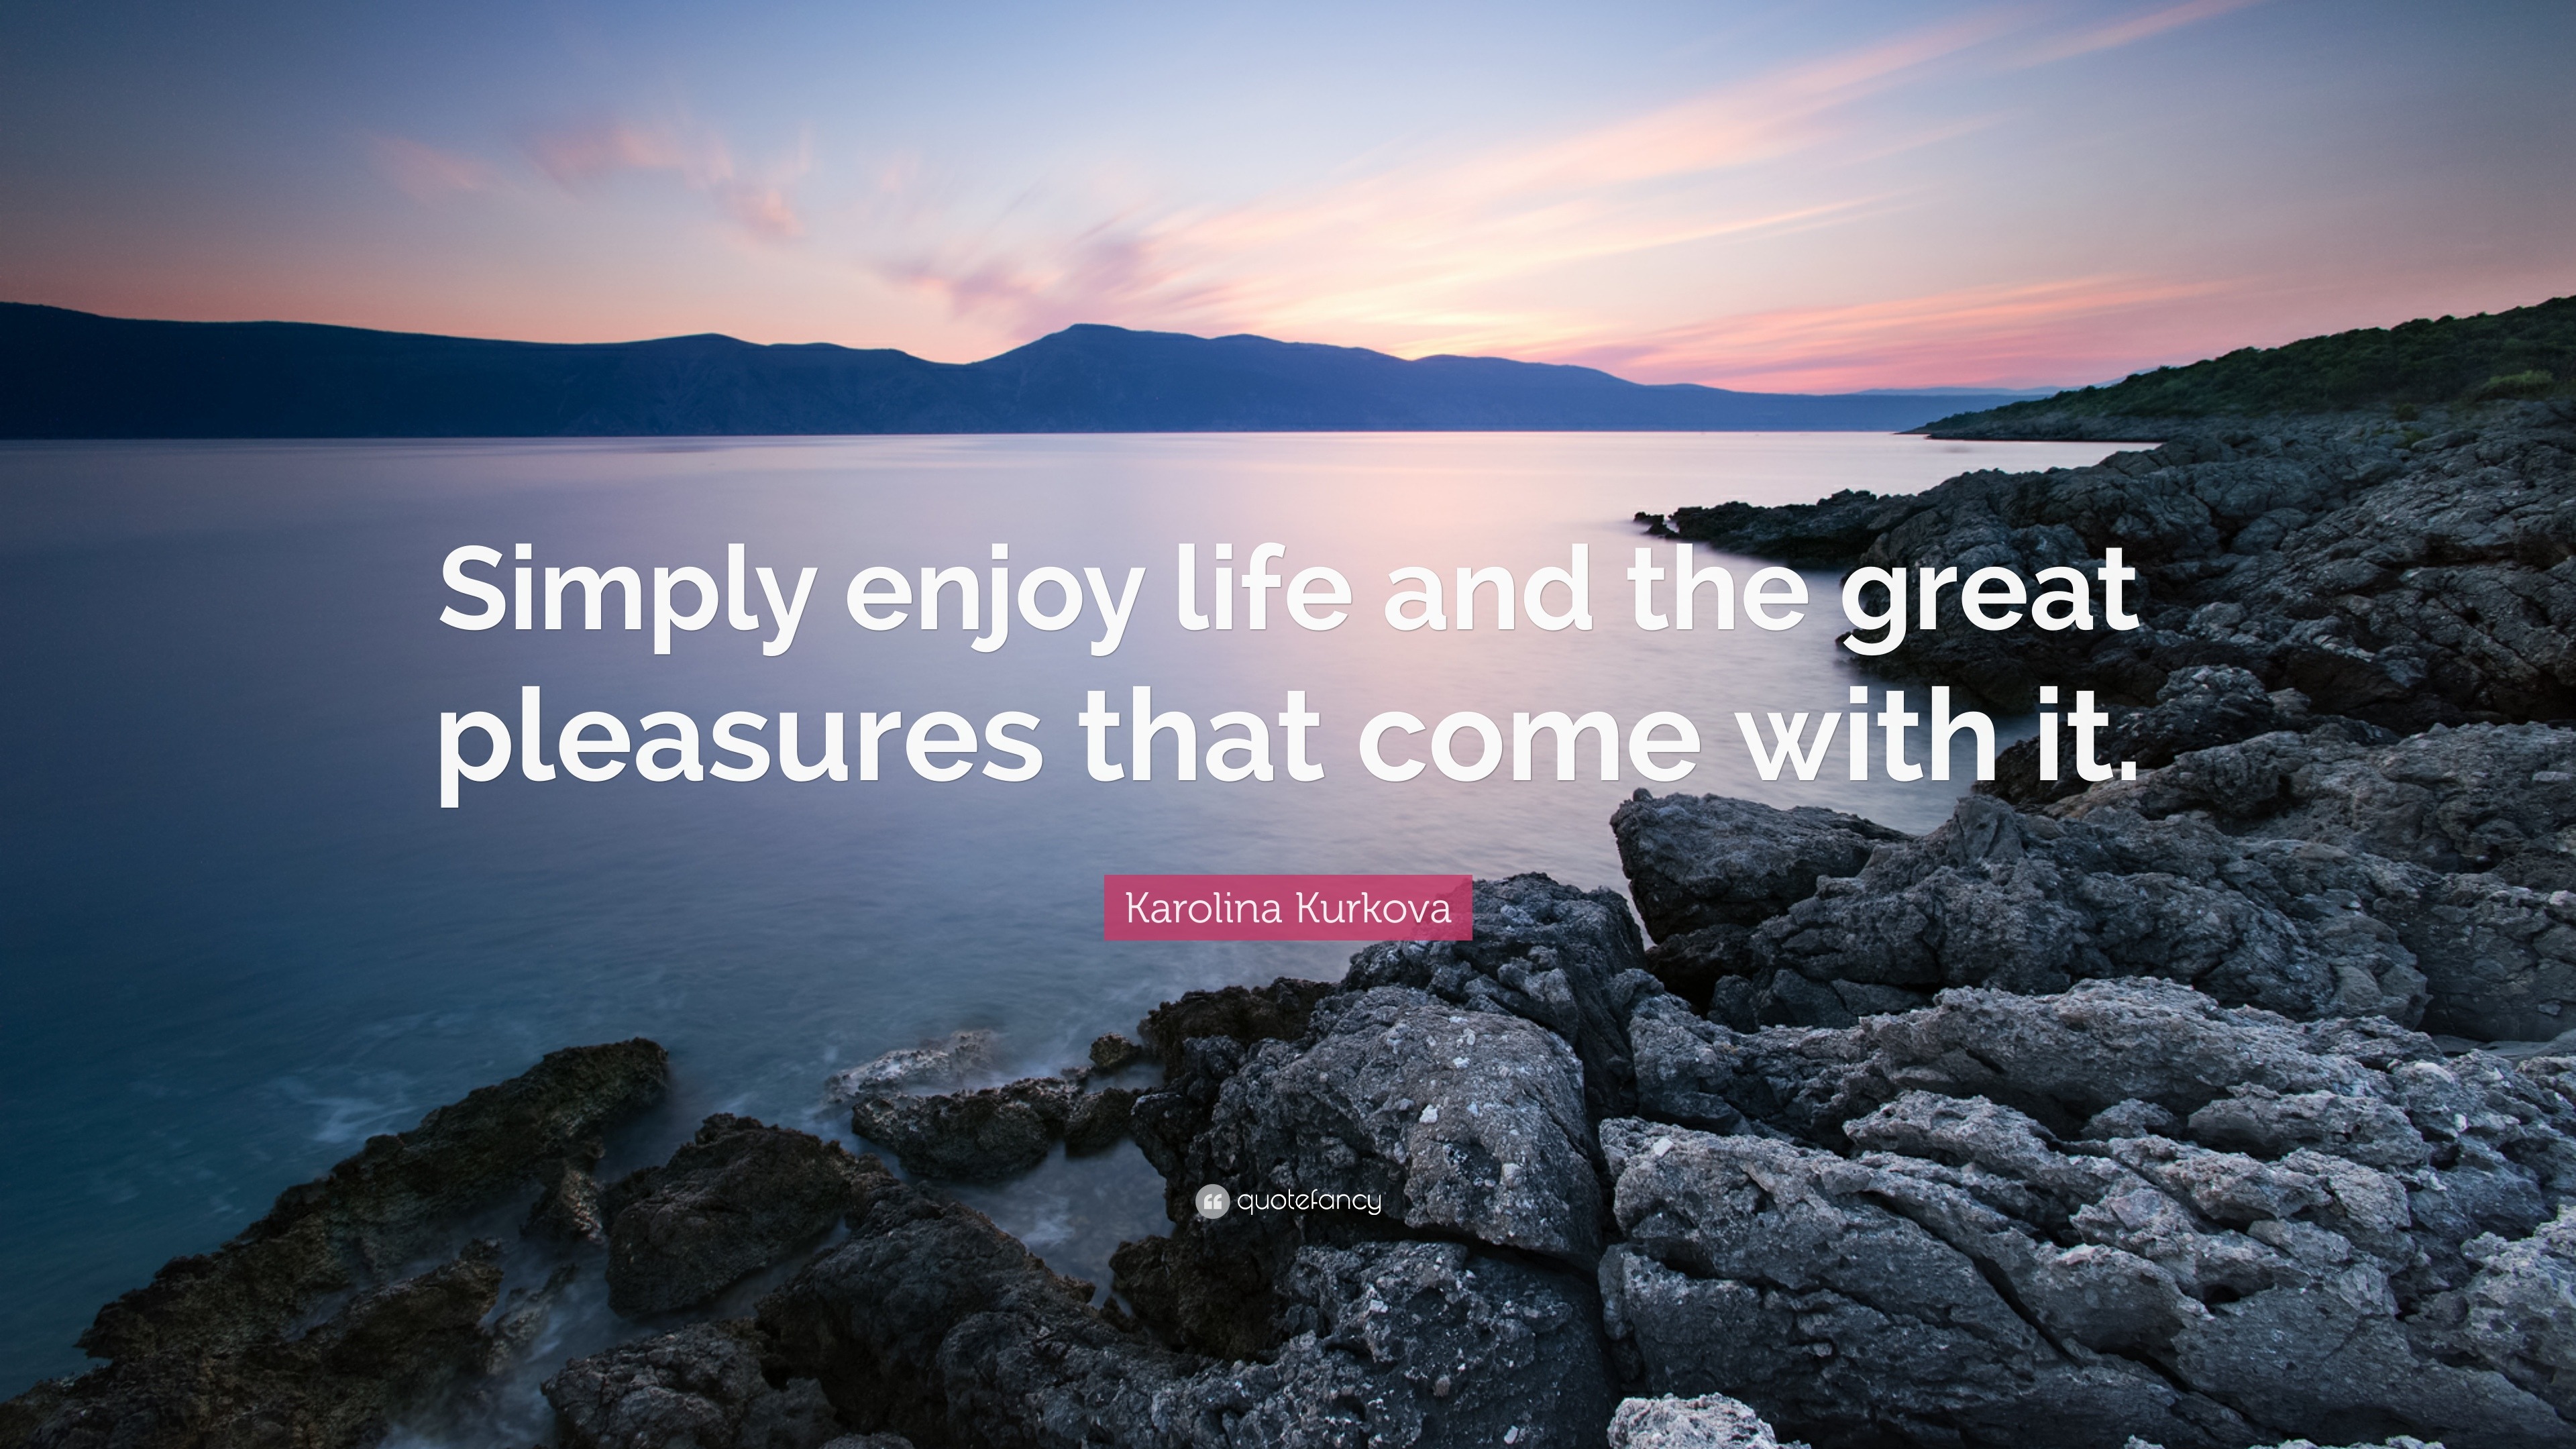 Simply enjoy life and the great pleasures that come with it. - Best  Positive Quotes